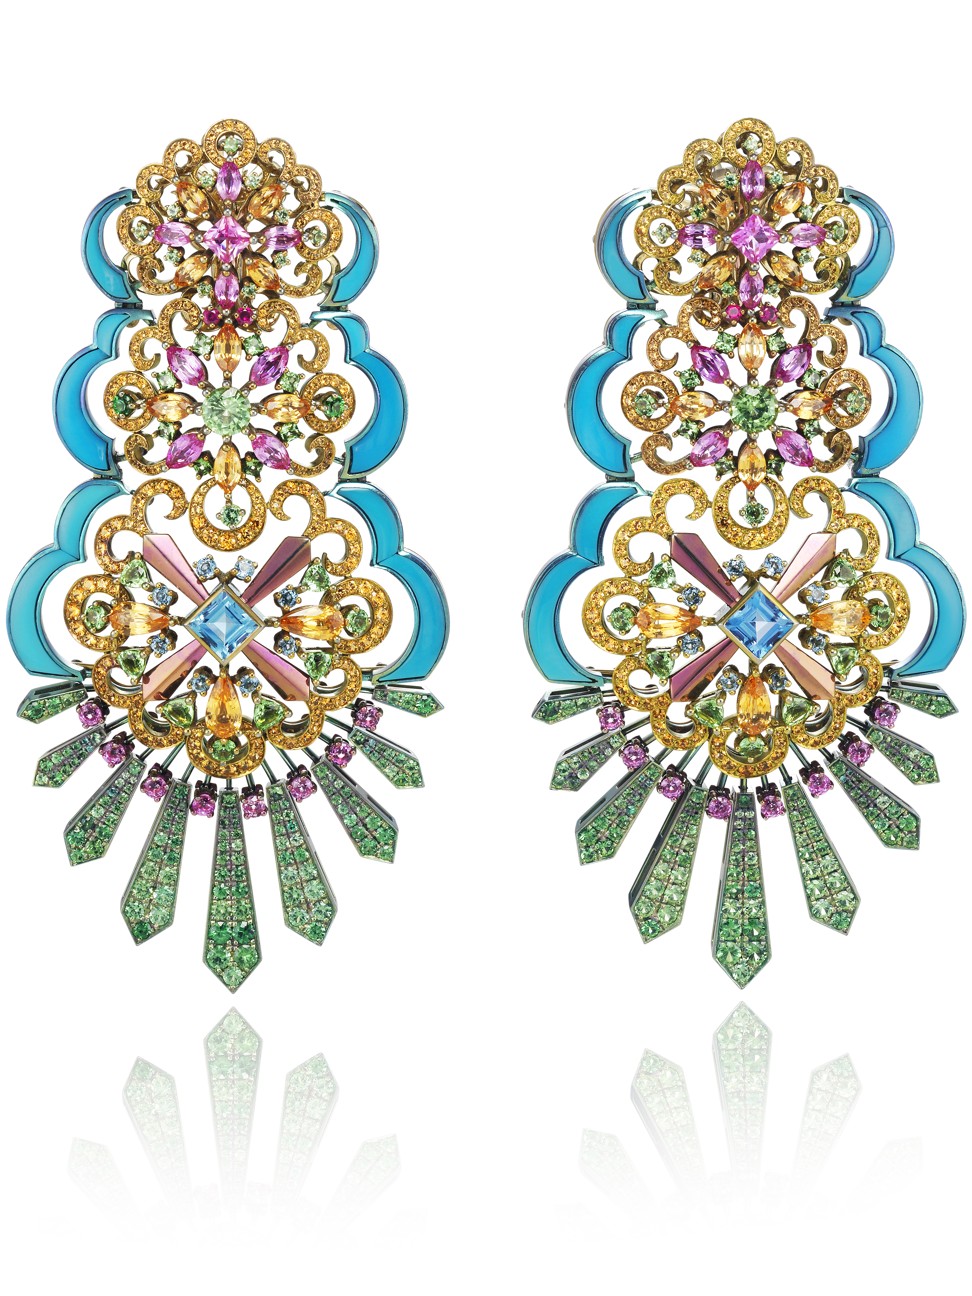 Earrings from the Carnival line of the Rihanna Loves Chopard capsule collection.